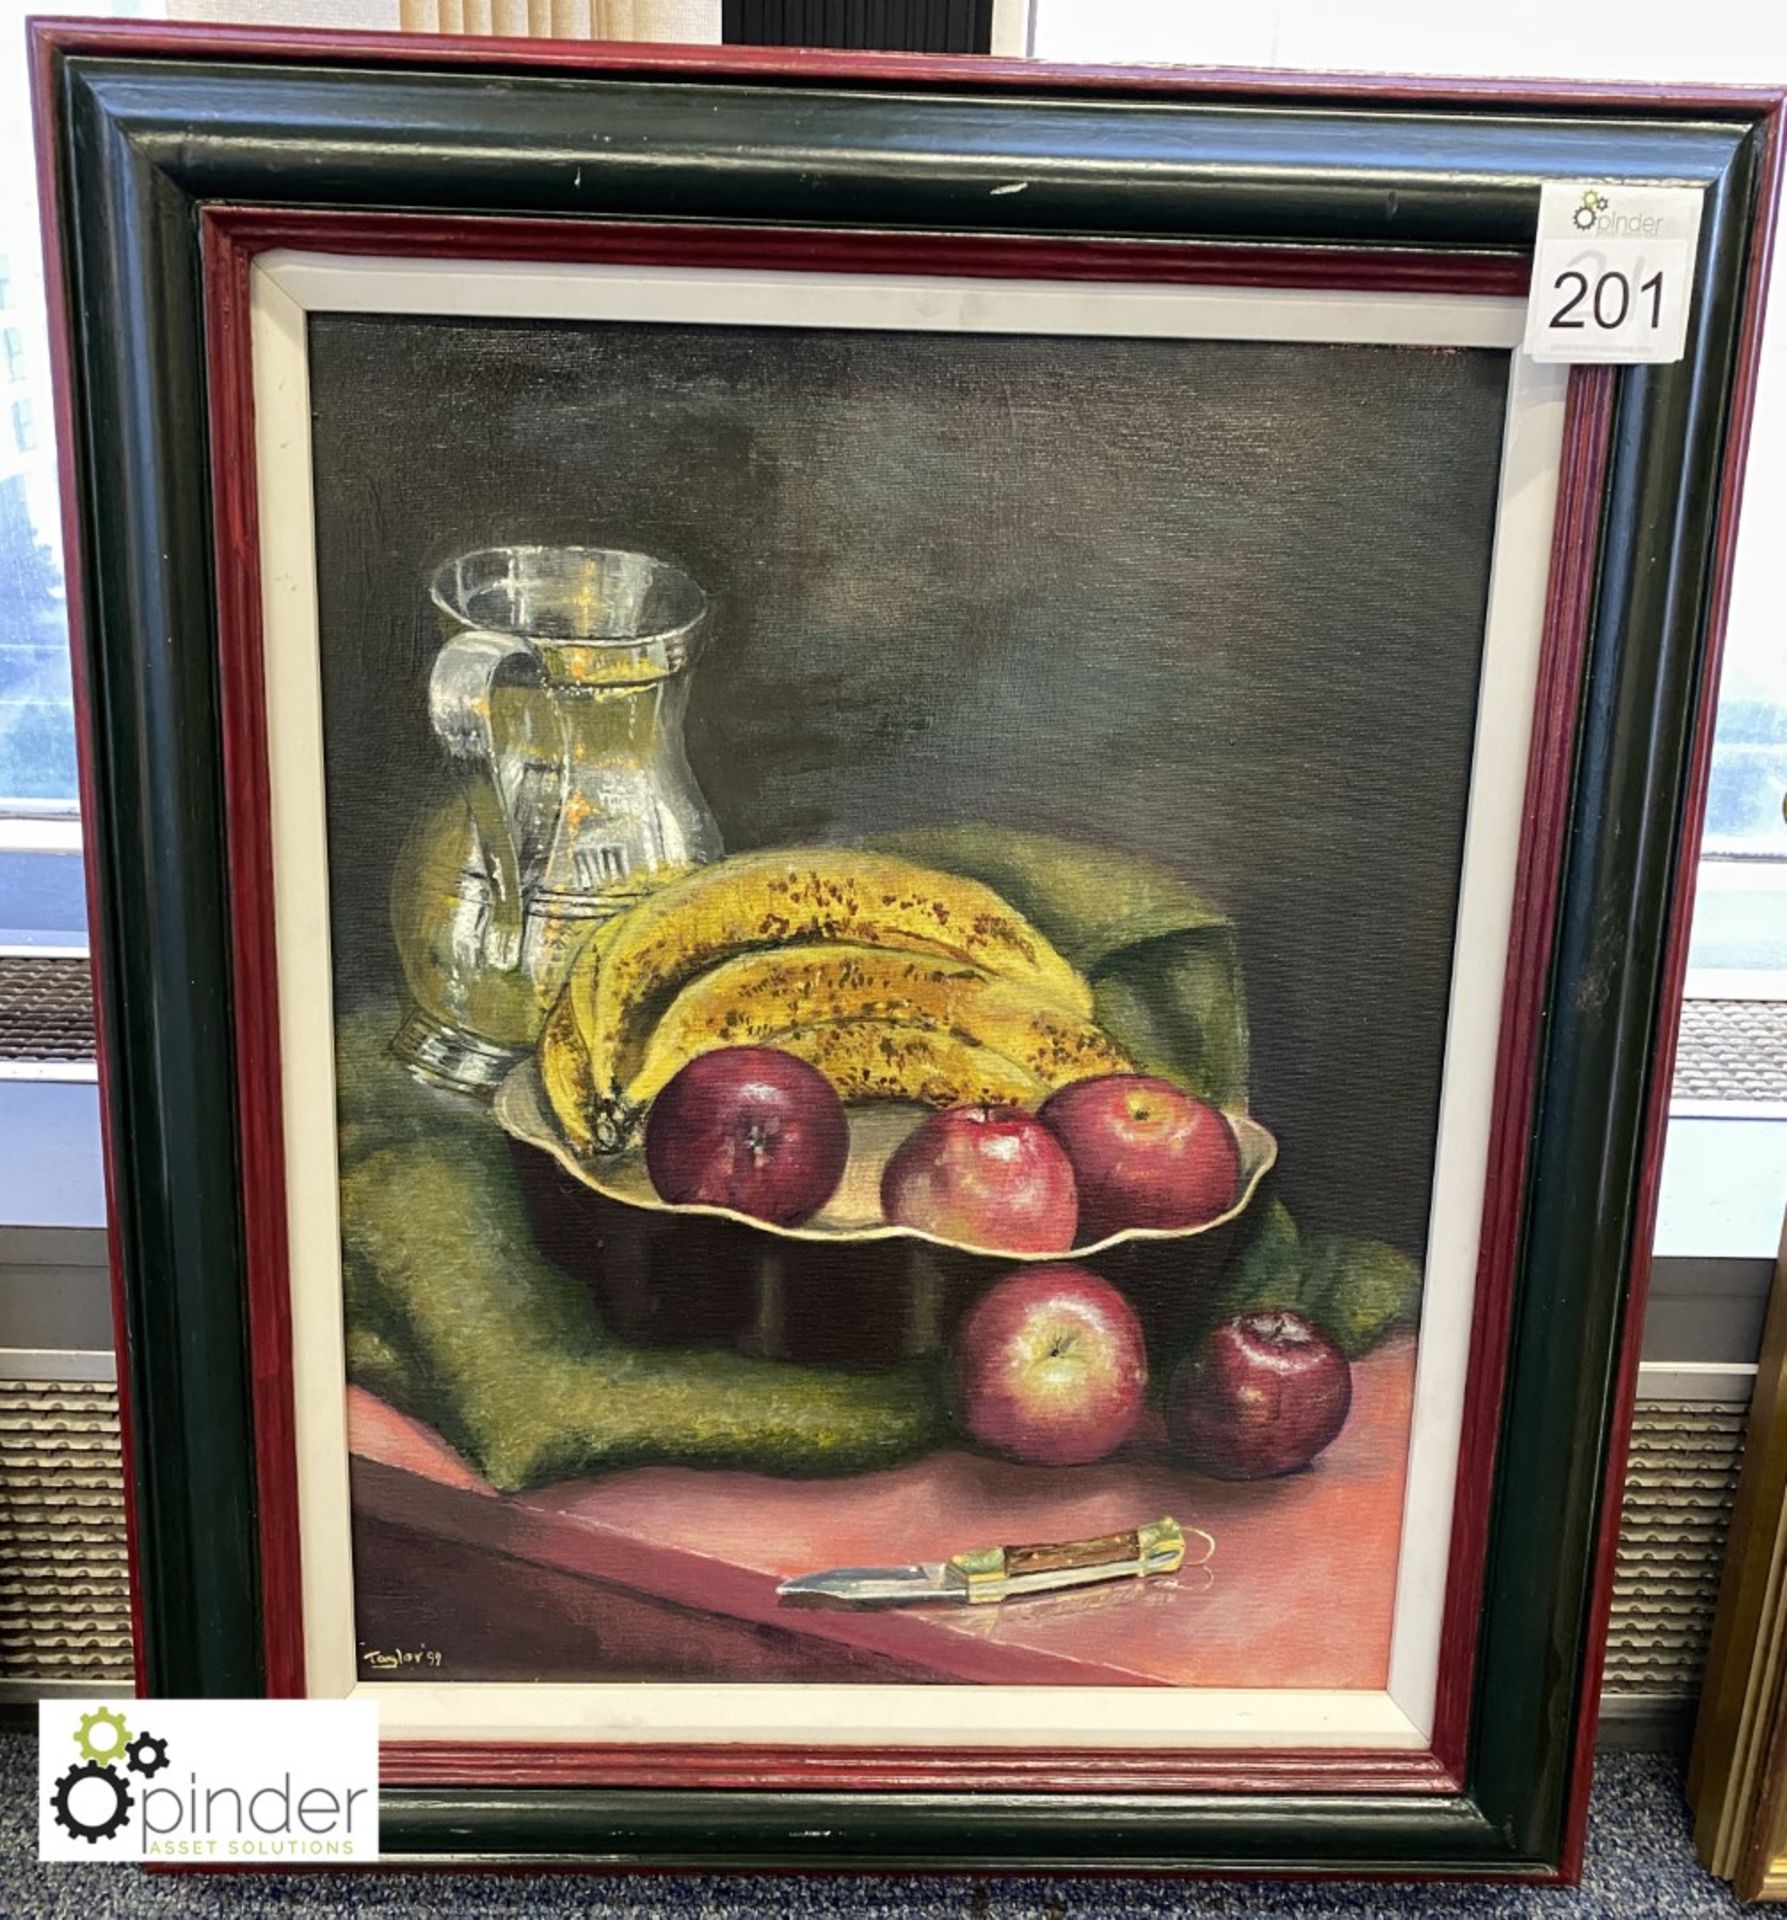 Framed Oil on Canvas “Pewter, Fruit and Knife” by Derek Alfred Taylor, 550mm x 660mm (located on 6th